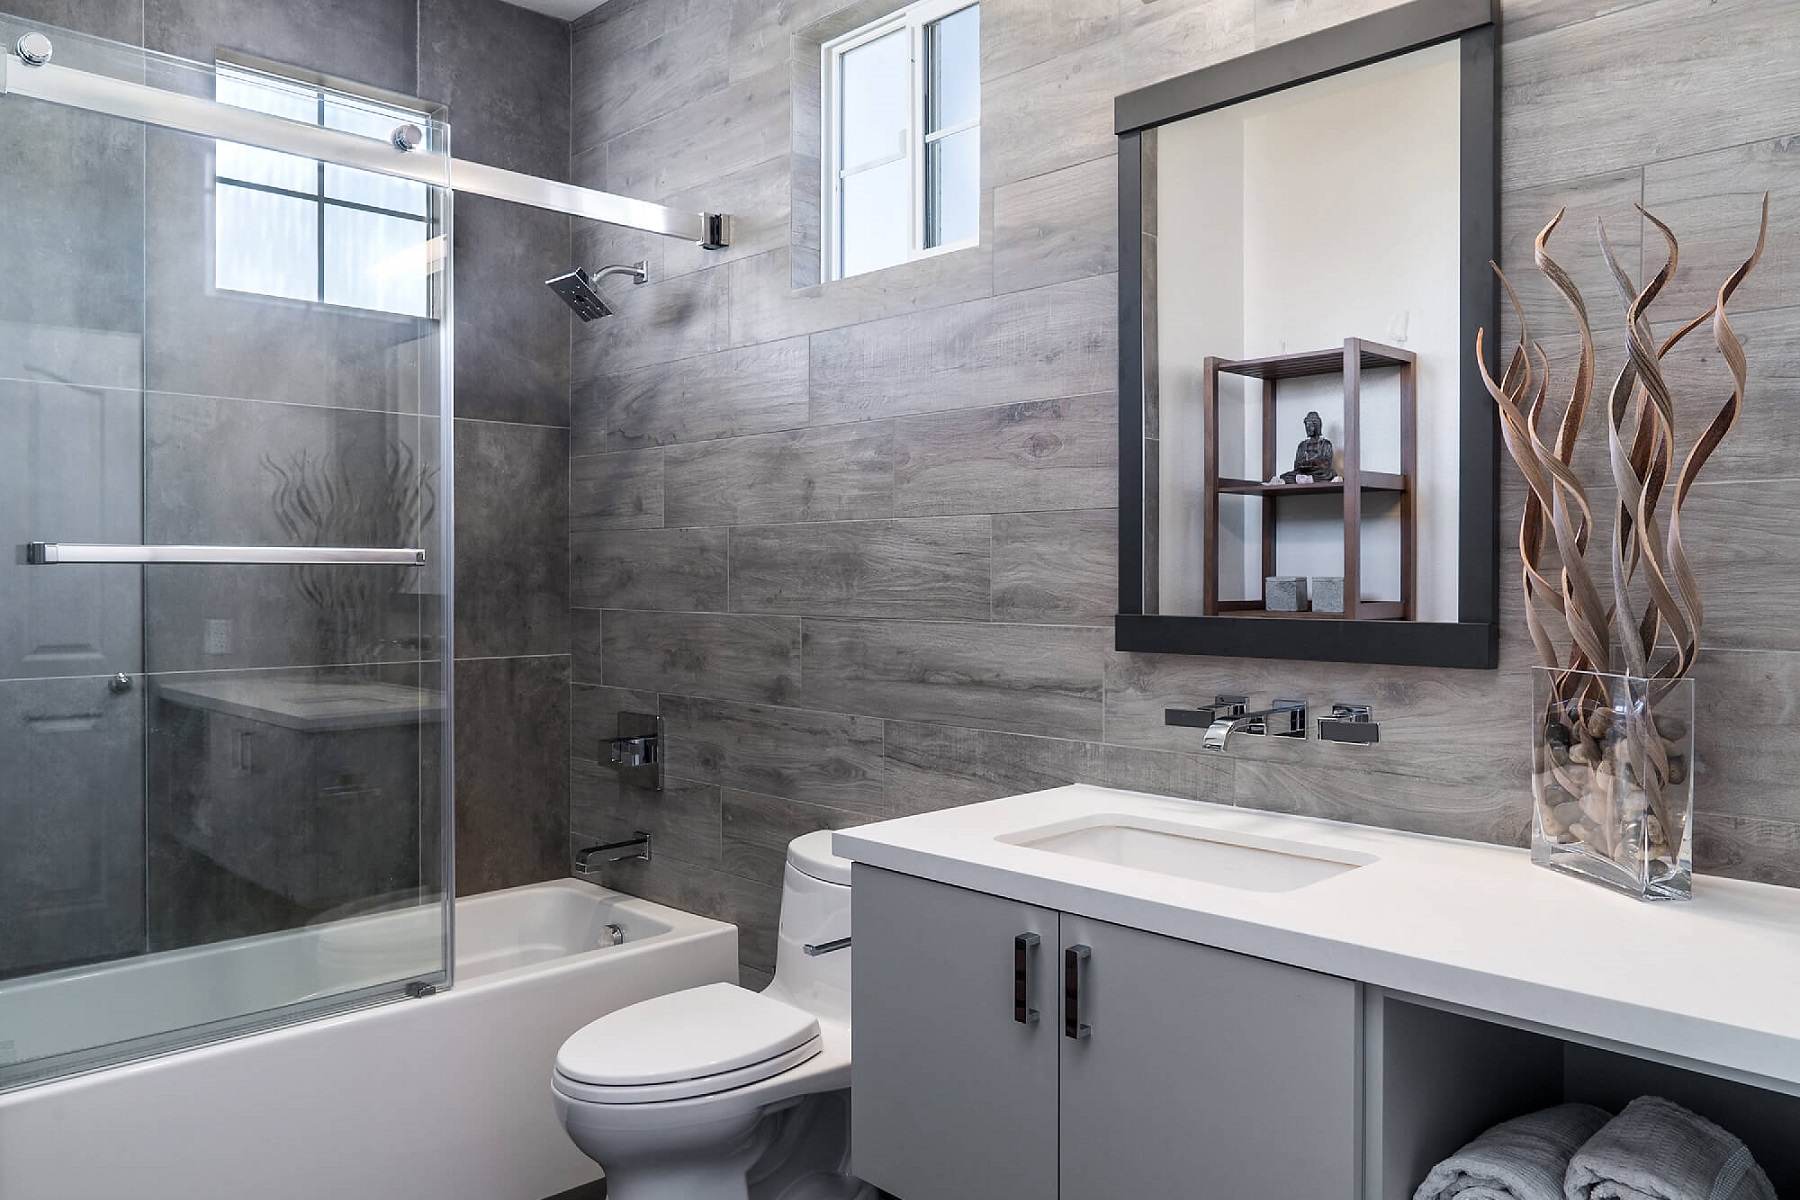 Know all you need to know about the local bathroom remodelers